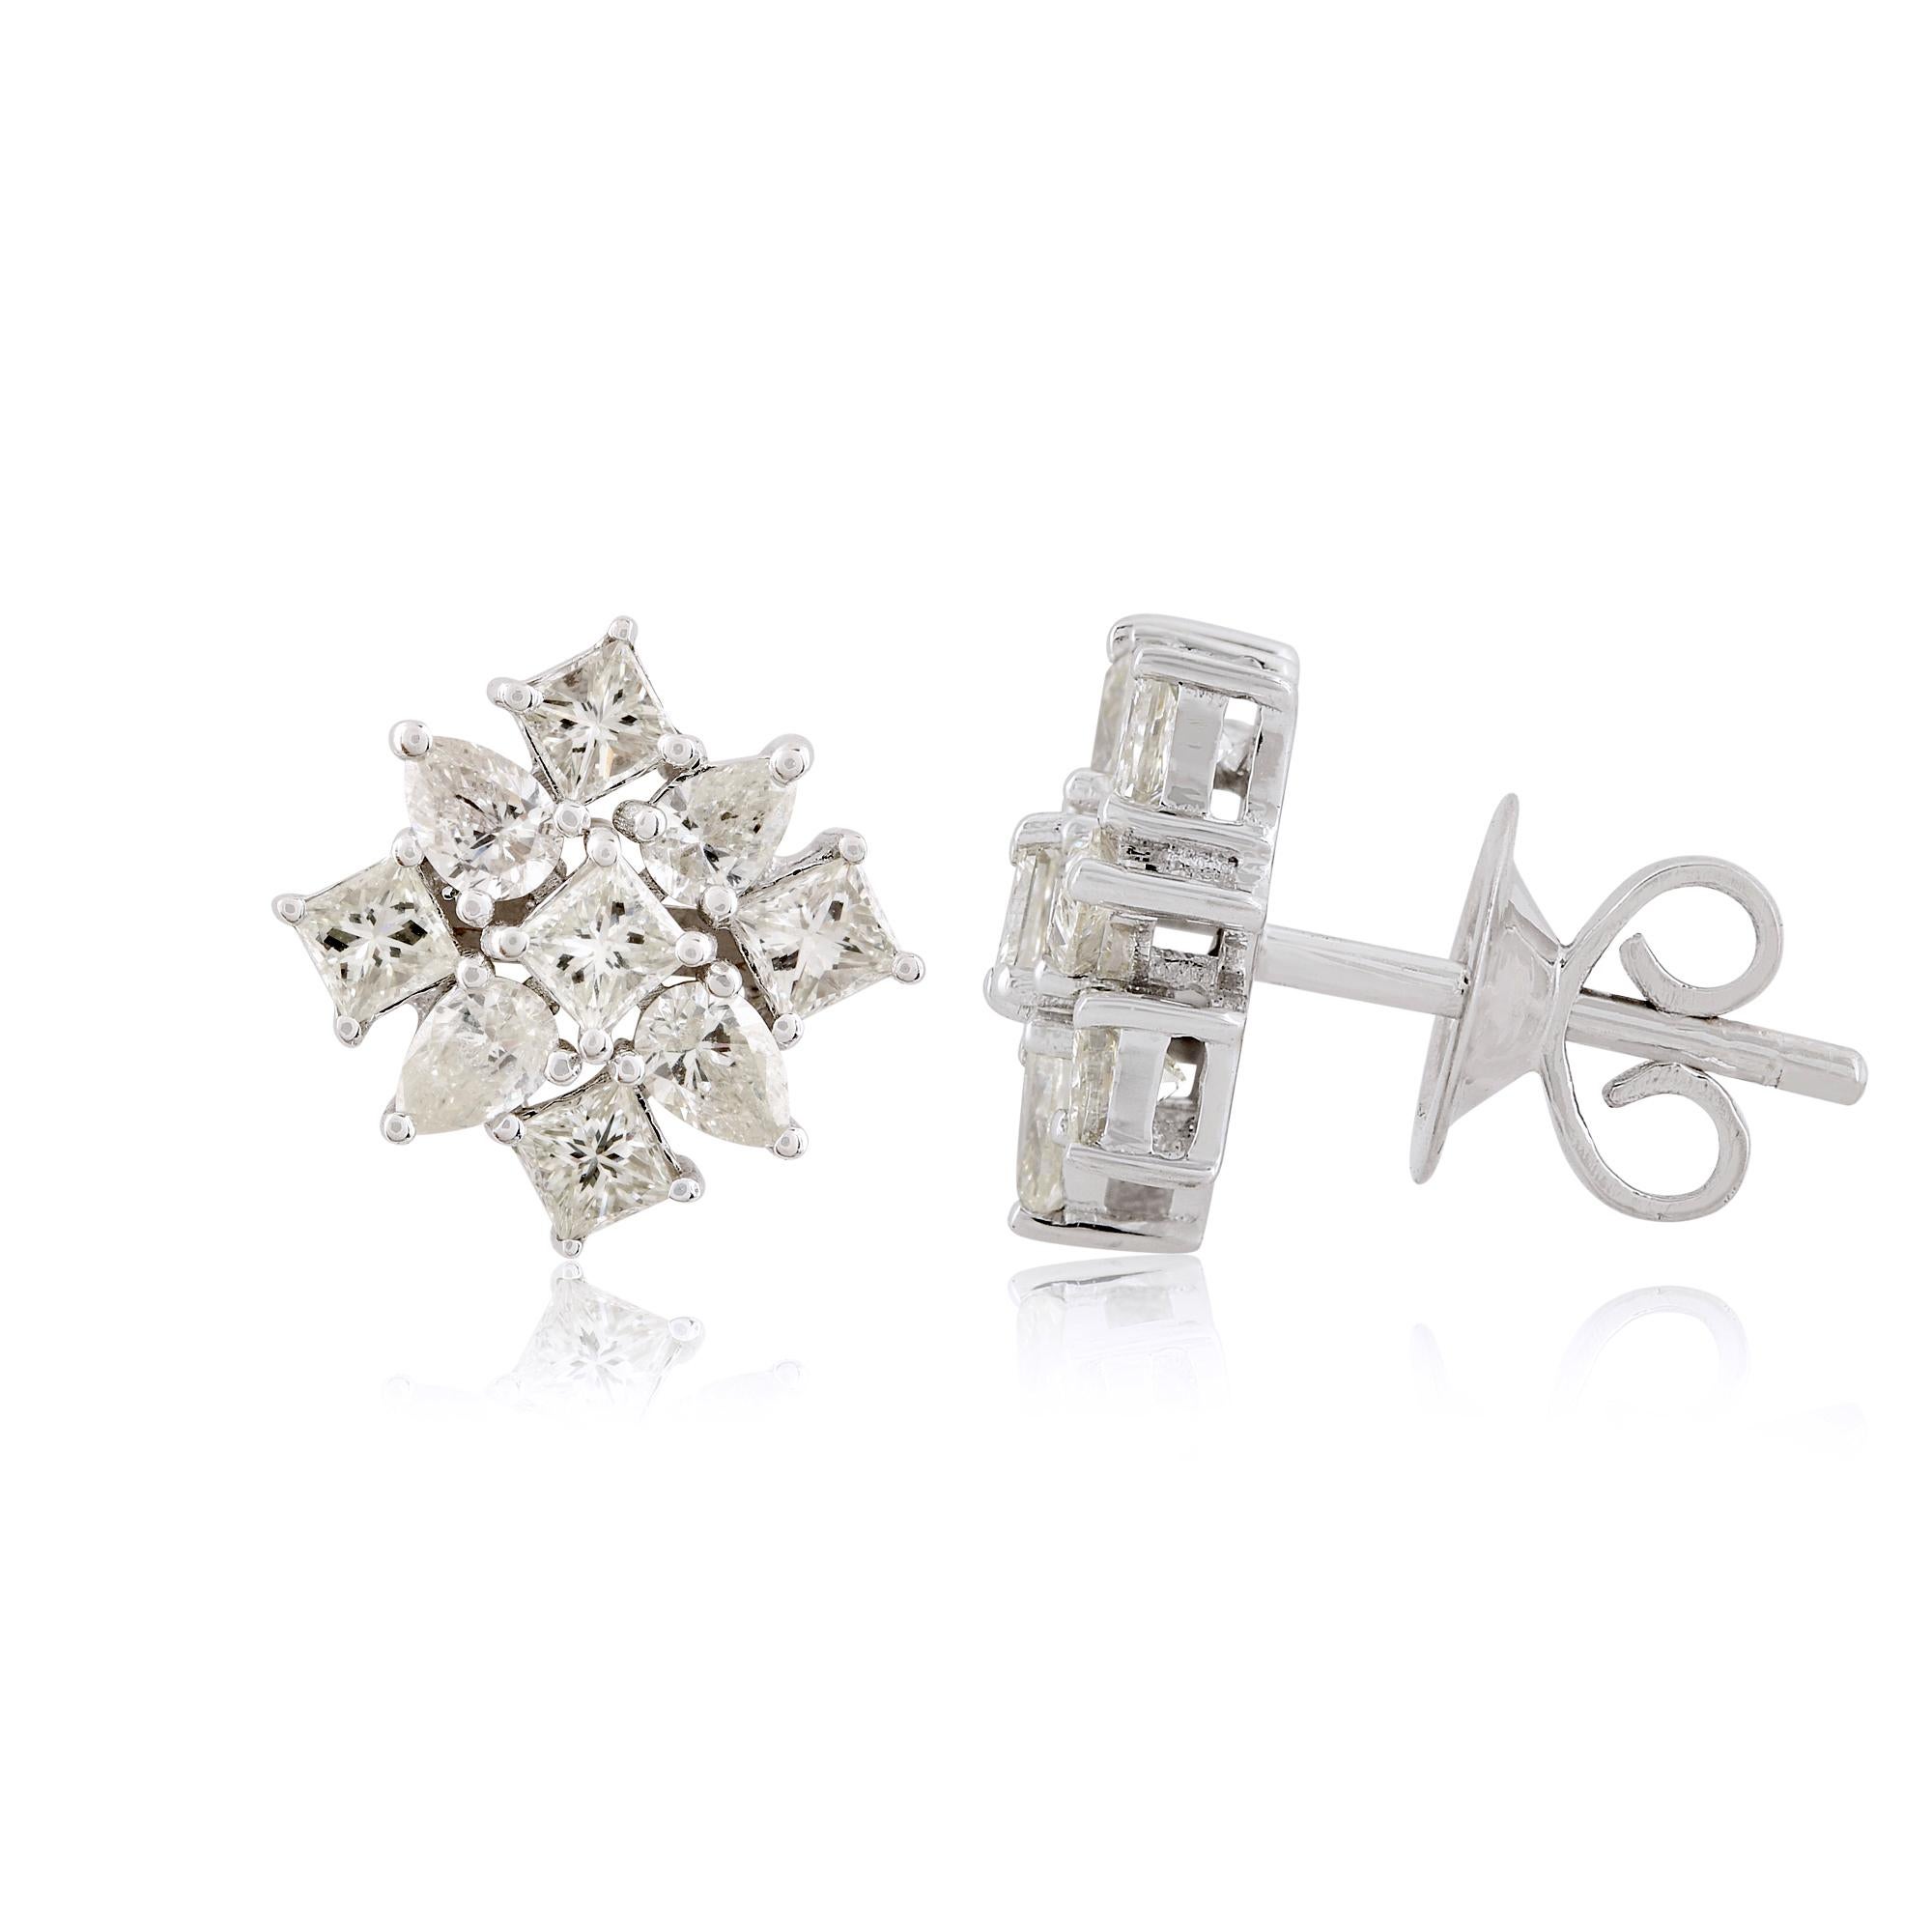 Crafted from the finest 18k gold, these diamond studs boast a timeless elegance that will never go out of style. The diamonds are expertly cut and set to maximize their brilliance and sparkle, making them a true statement piece that will catch the